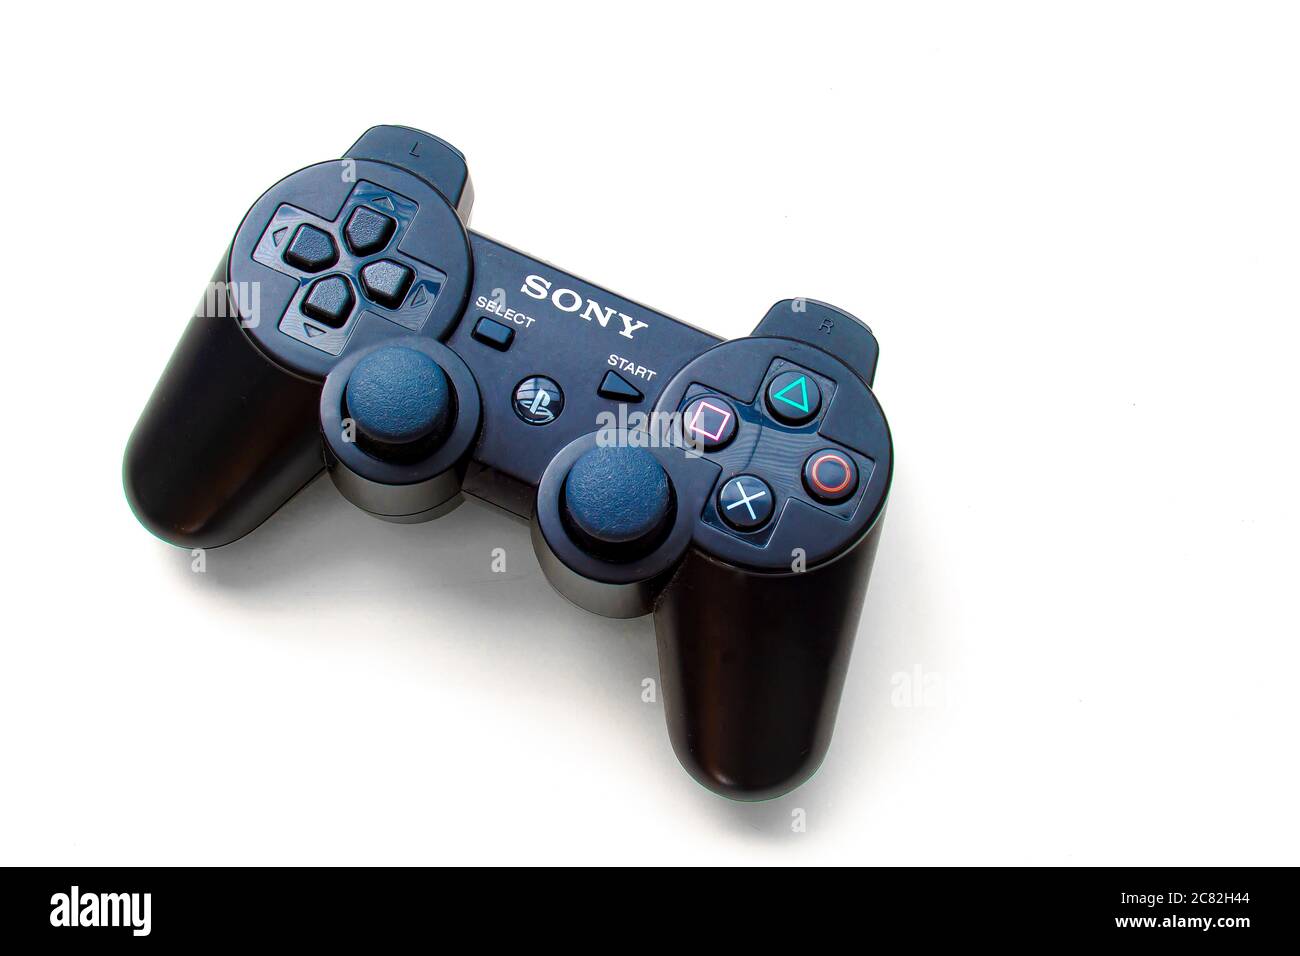 Calgary, Alberta, Canada. July 20, 2020. Black Sony Play Station control remote on a white background Stock Photo